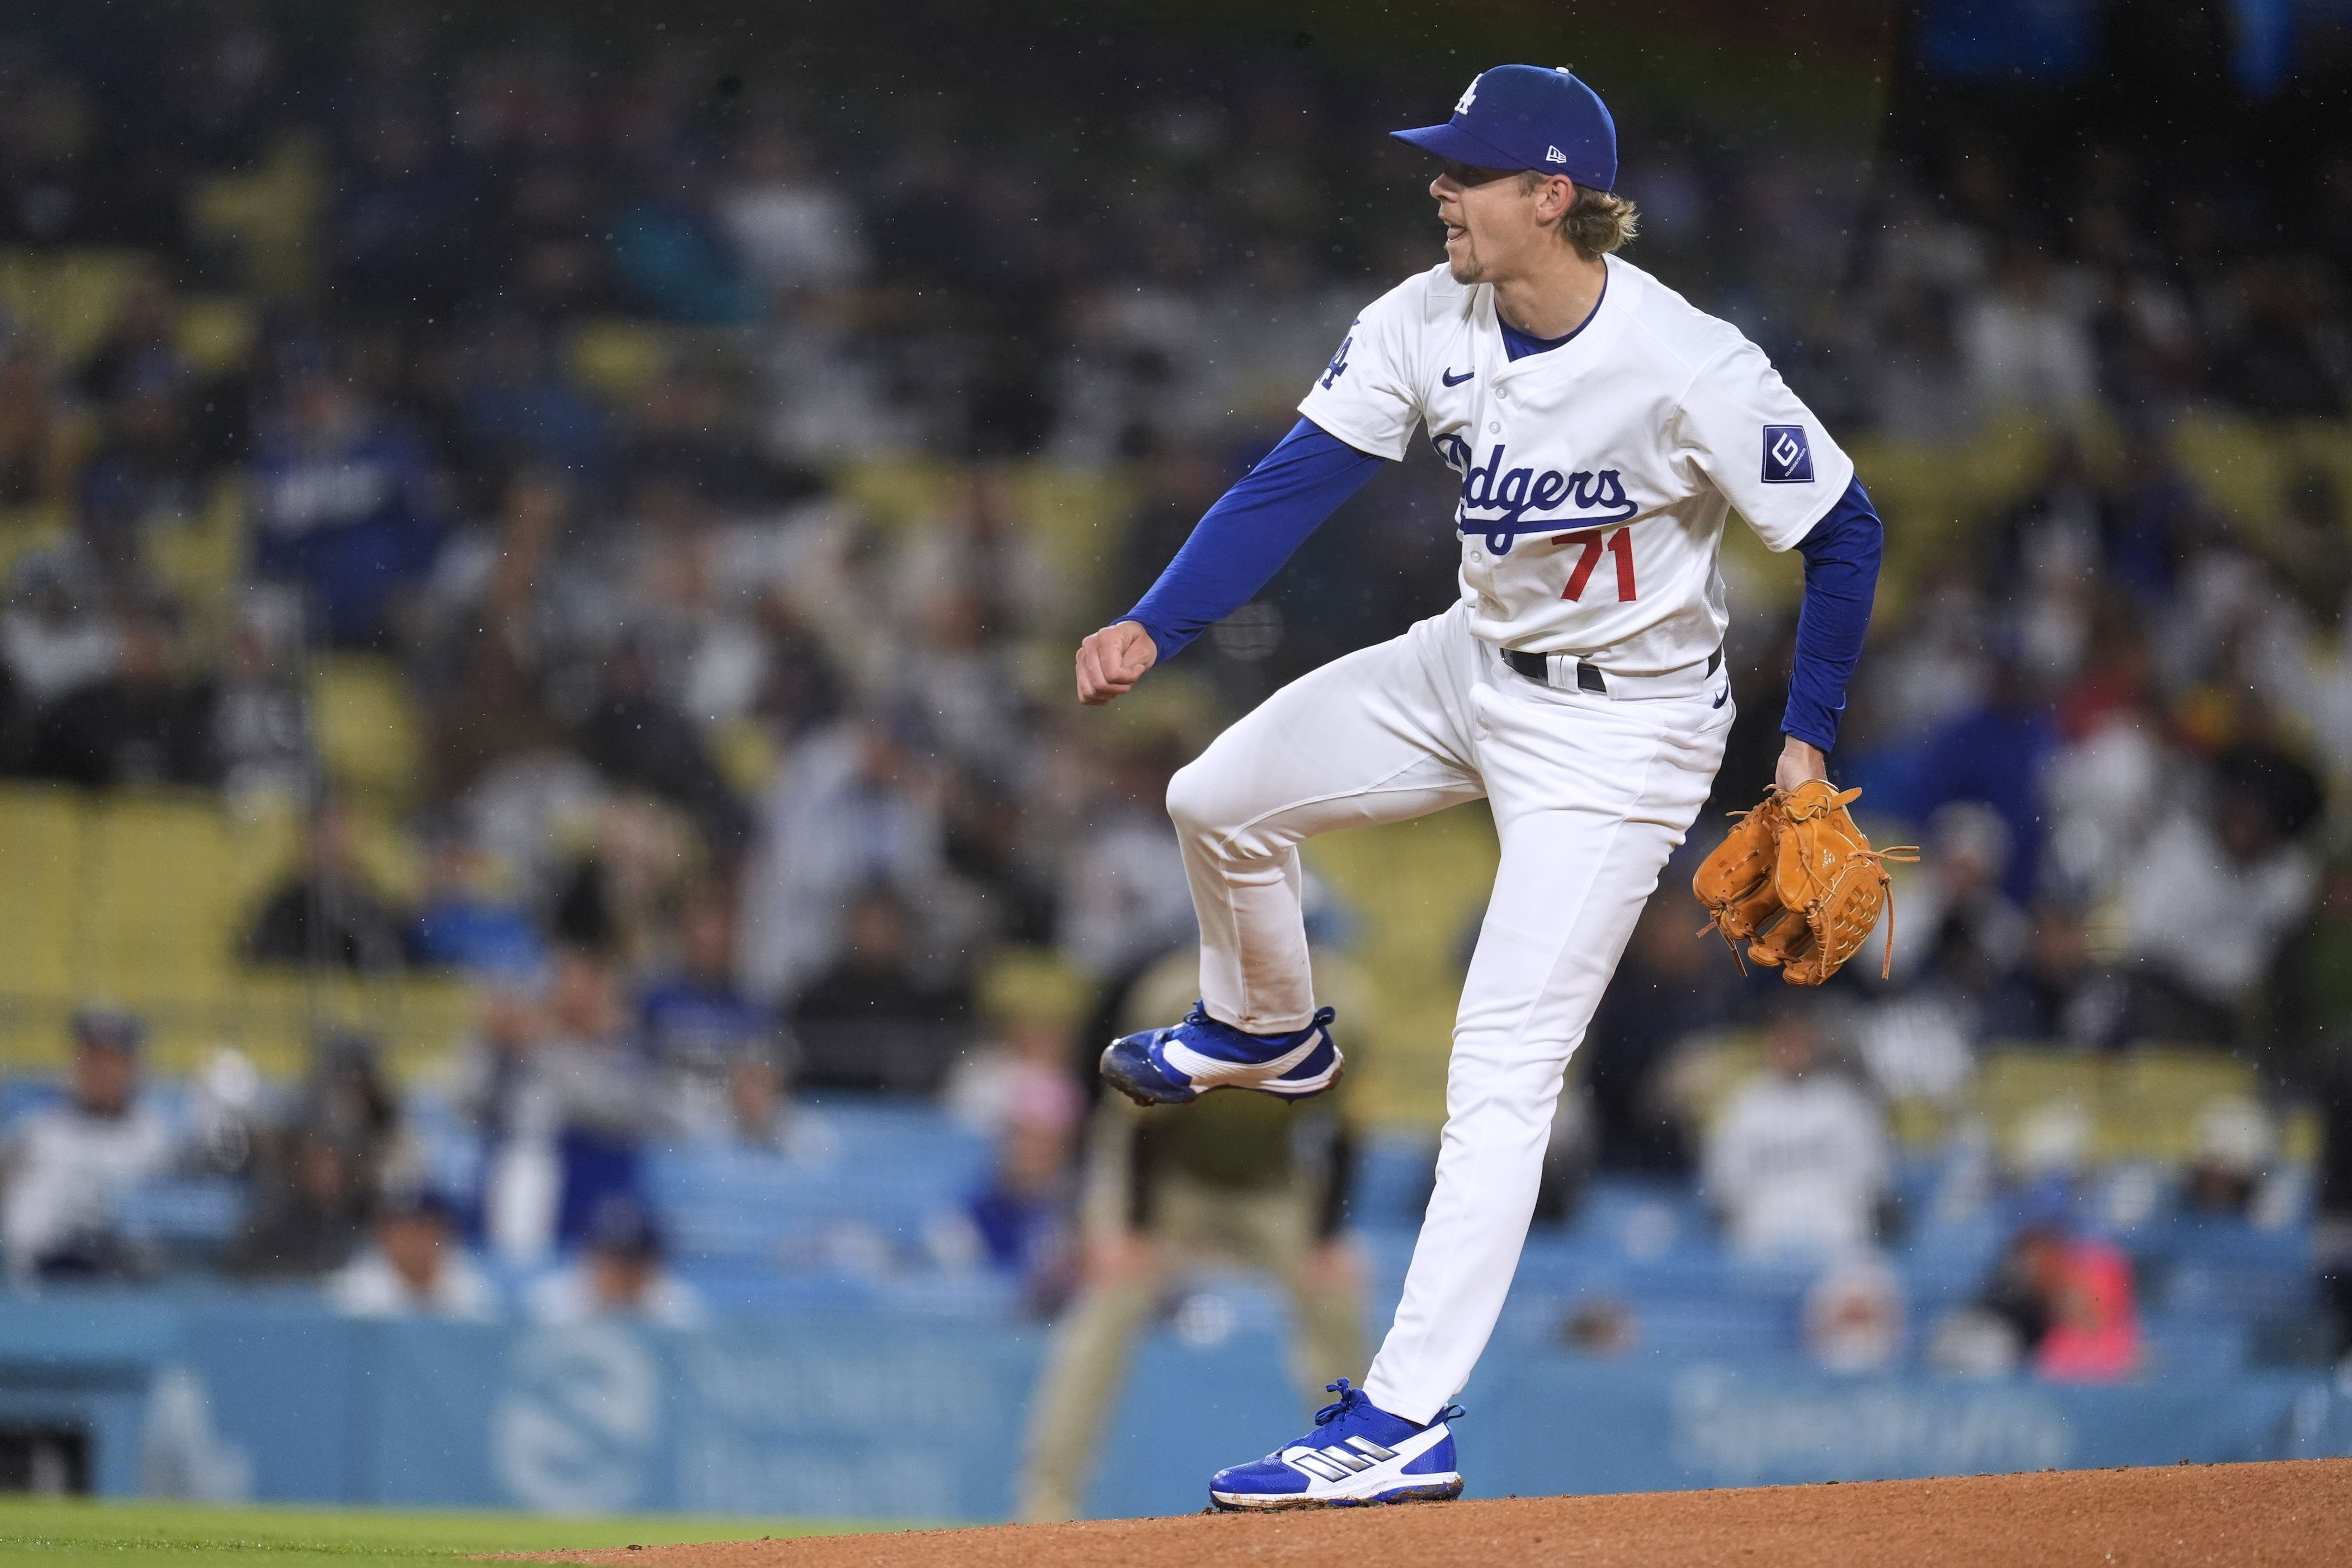 stone perfect into 6th inning and betts drives offense as dodgers beat padres 5-2 in testy game